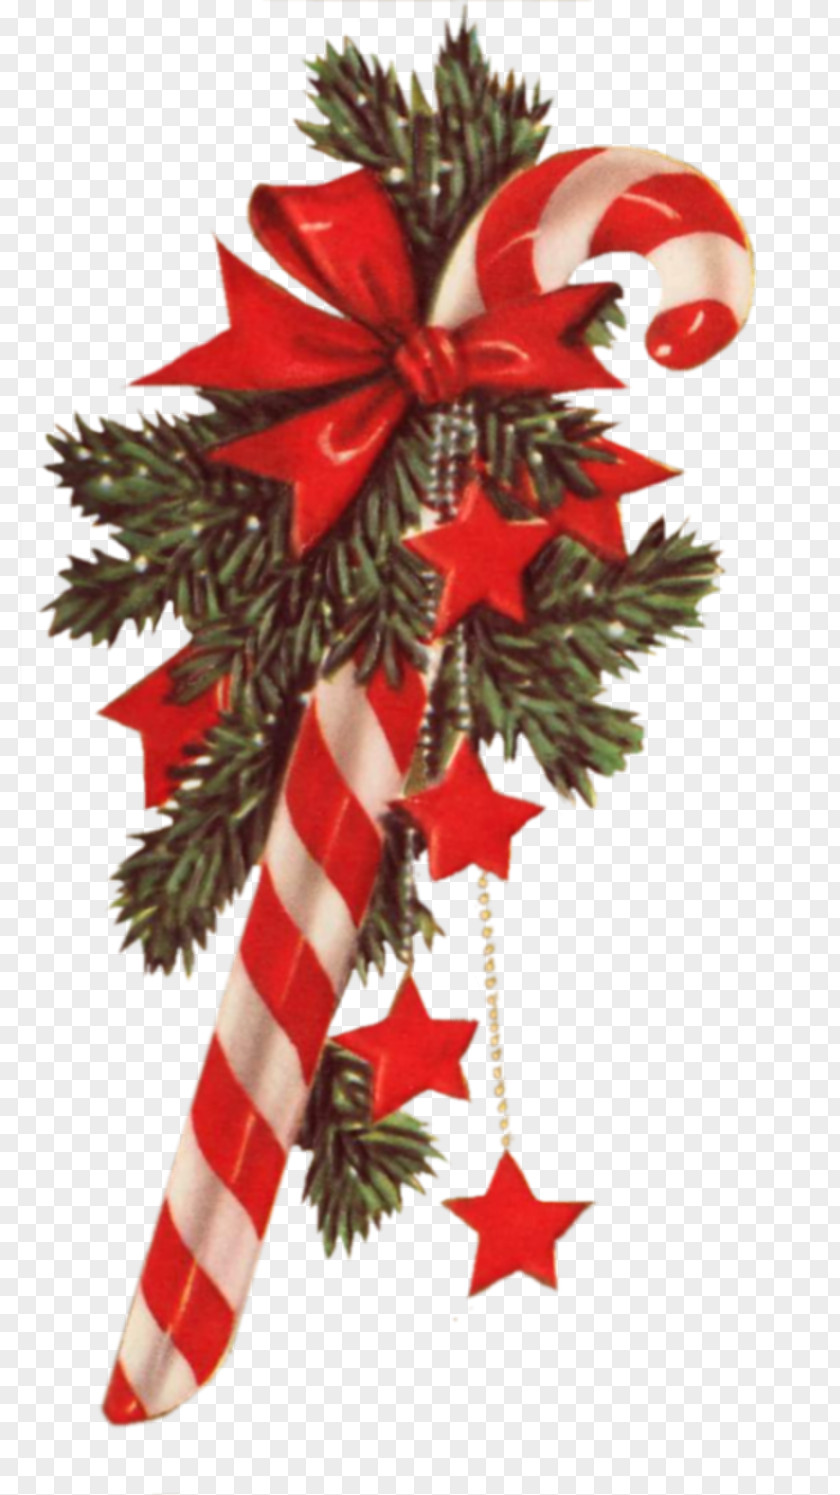 Mall Decoration Christmas Ornament PNG